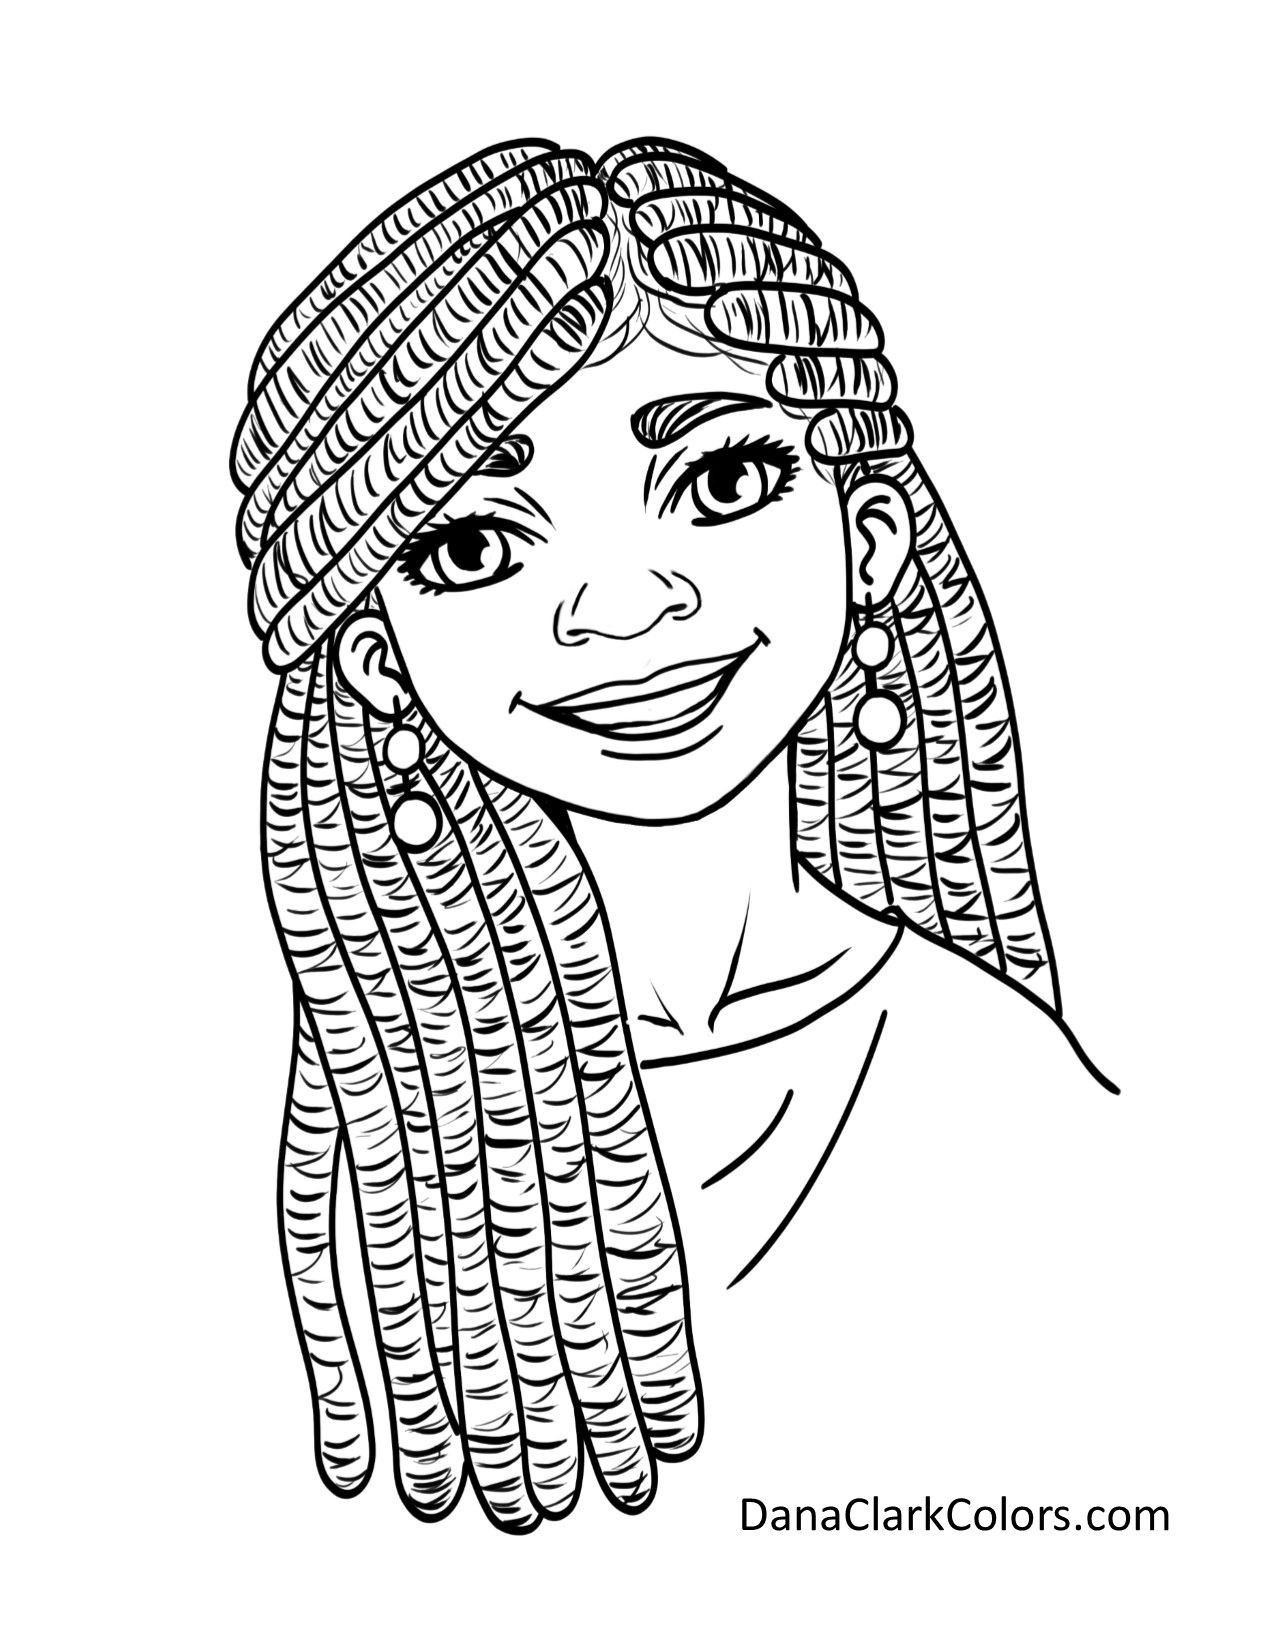 Girl With A Book Coloring Pages
 Black Kids coloring page AfricanAmericanColoringPage